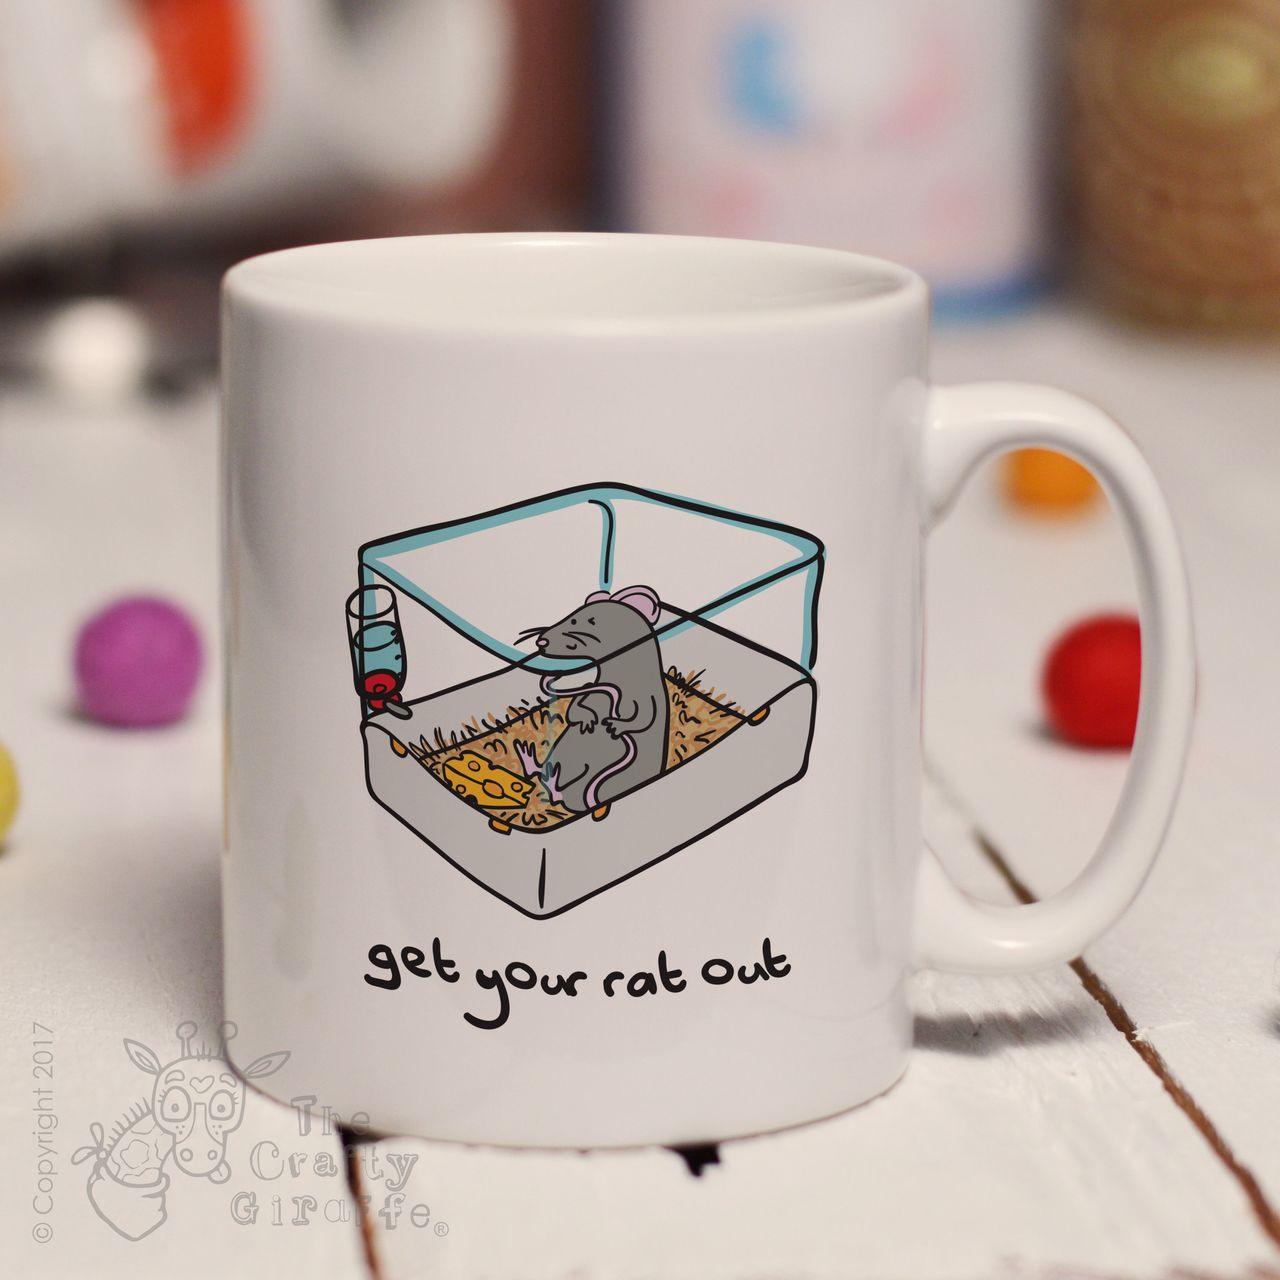 Get your rat out cage mug